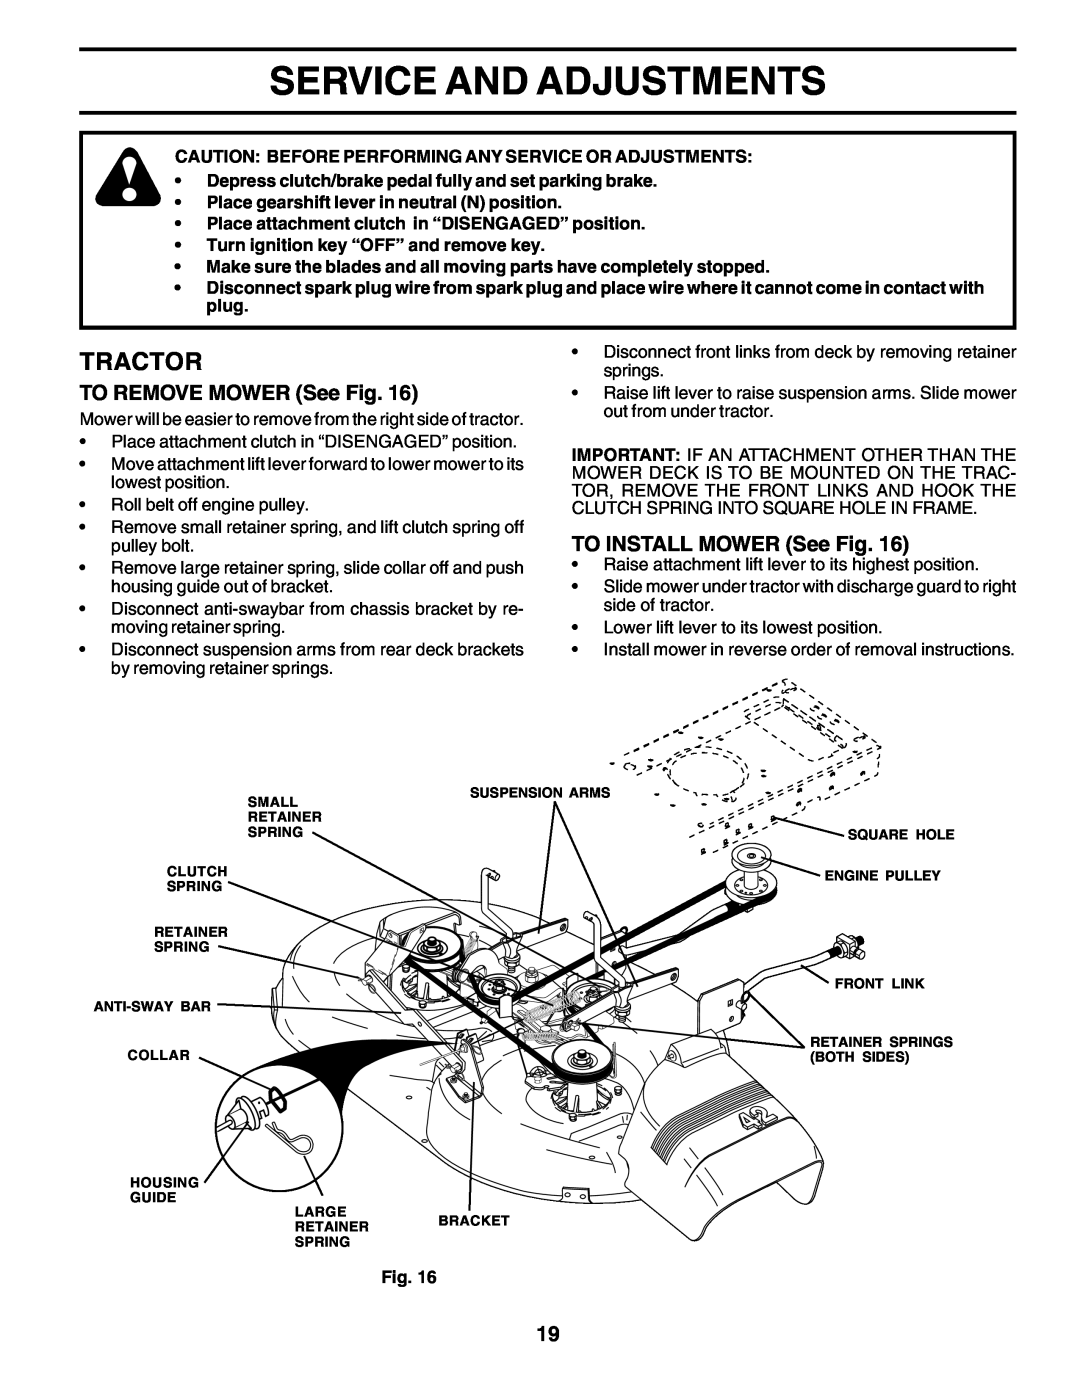 Poulan 179416 manual Service And Adjustments, Tractor, TO REMOVE MOWER See Fig, TO INSTALL MOWER See Fig 